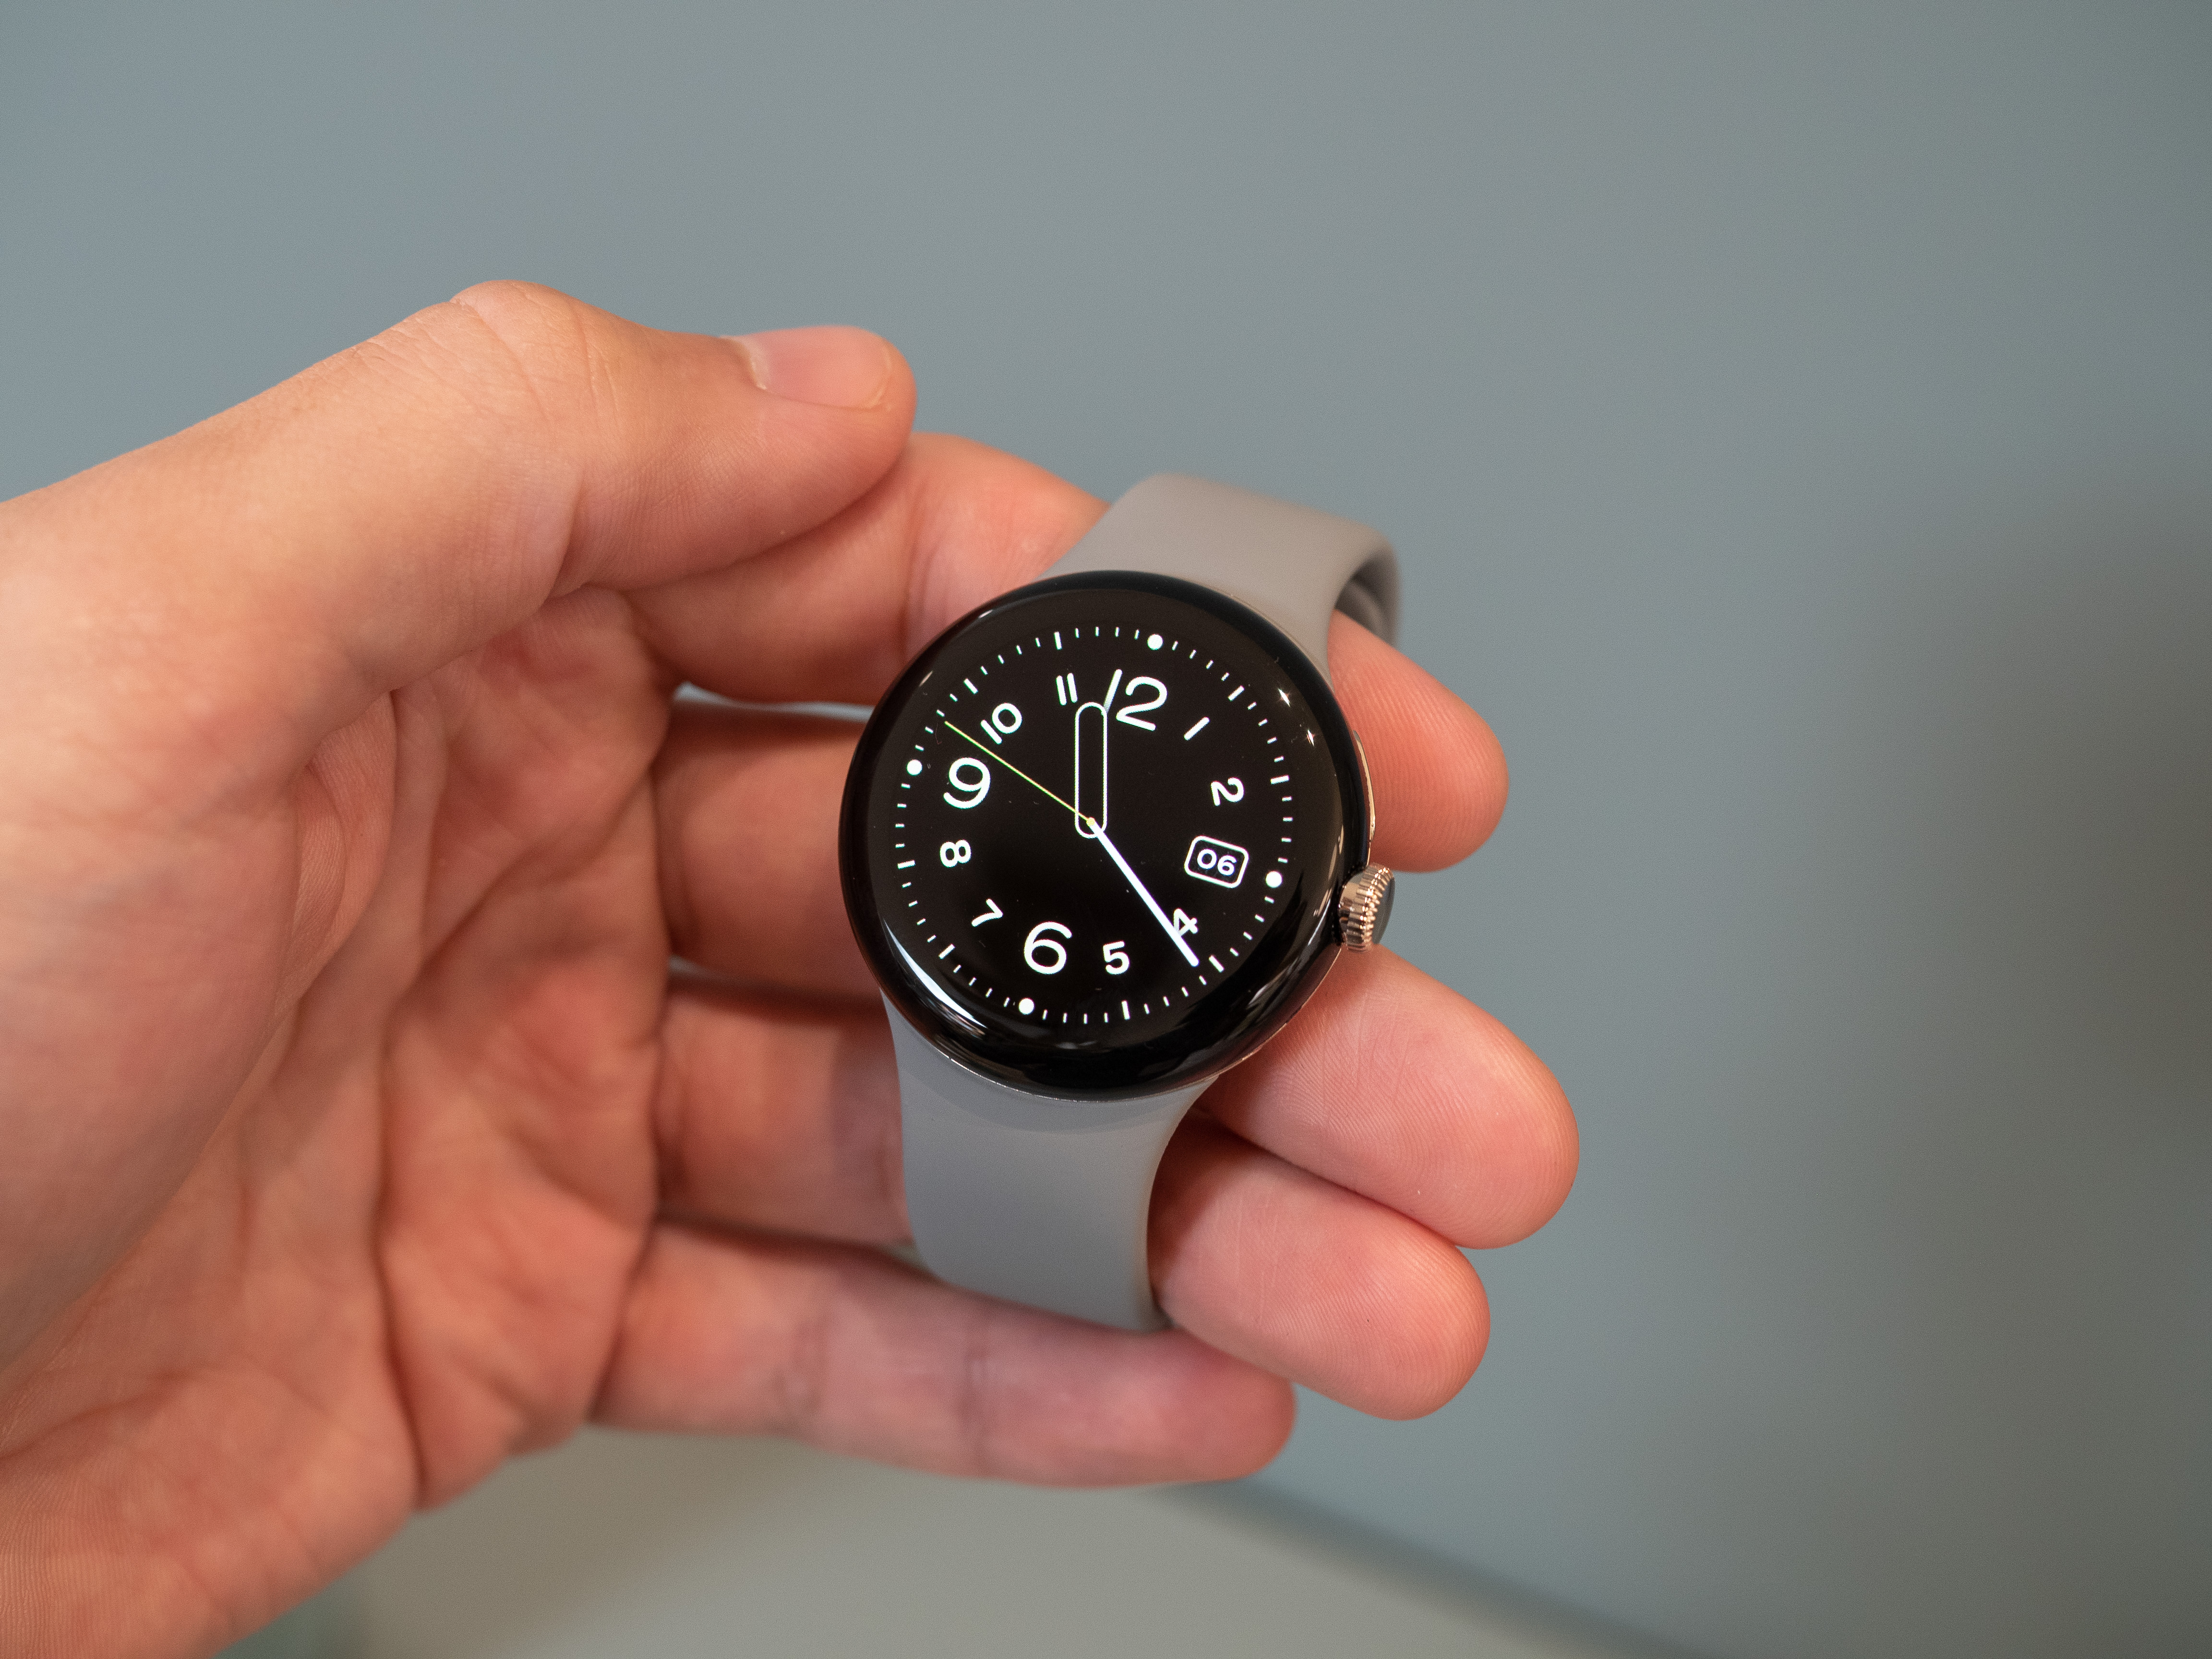 Google Pixel Watch hands-on: years of work has come to this